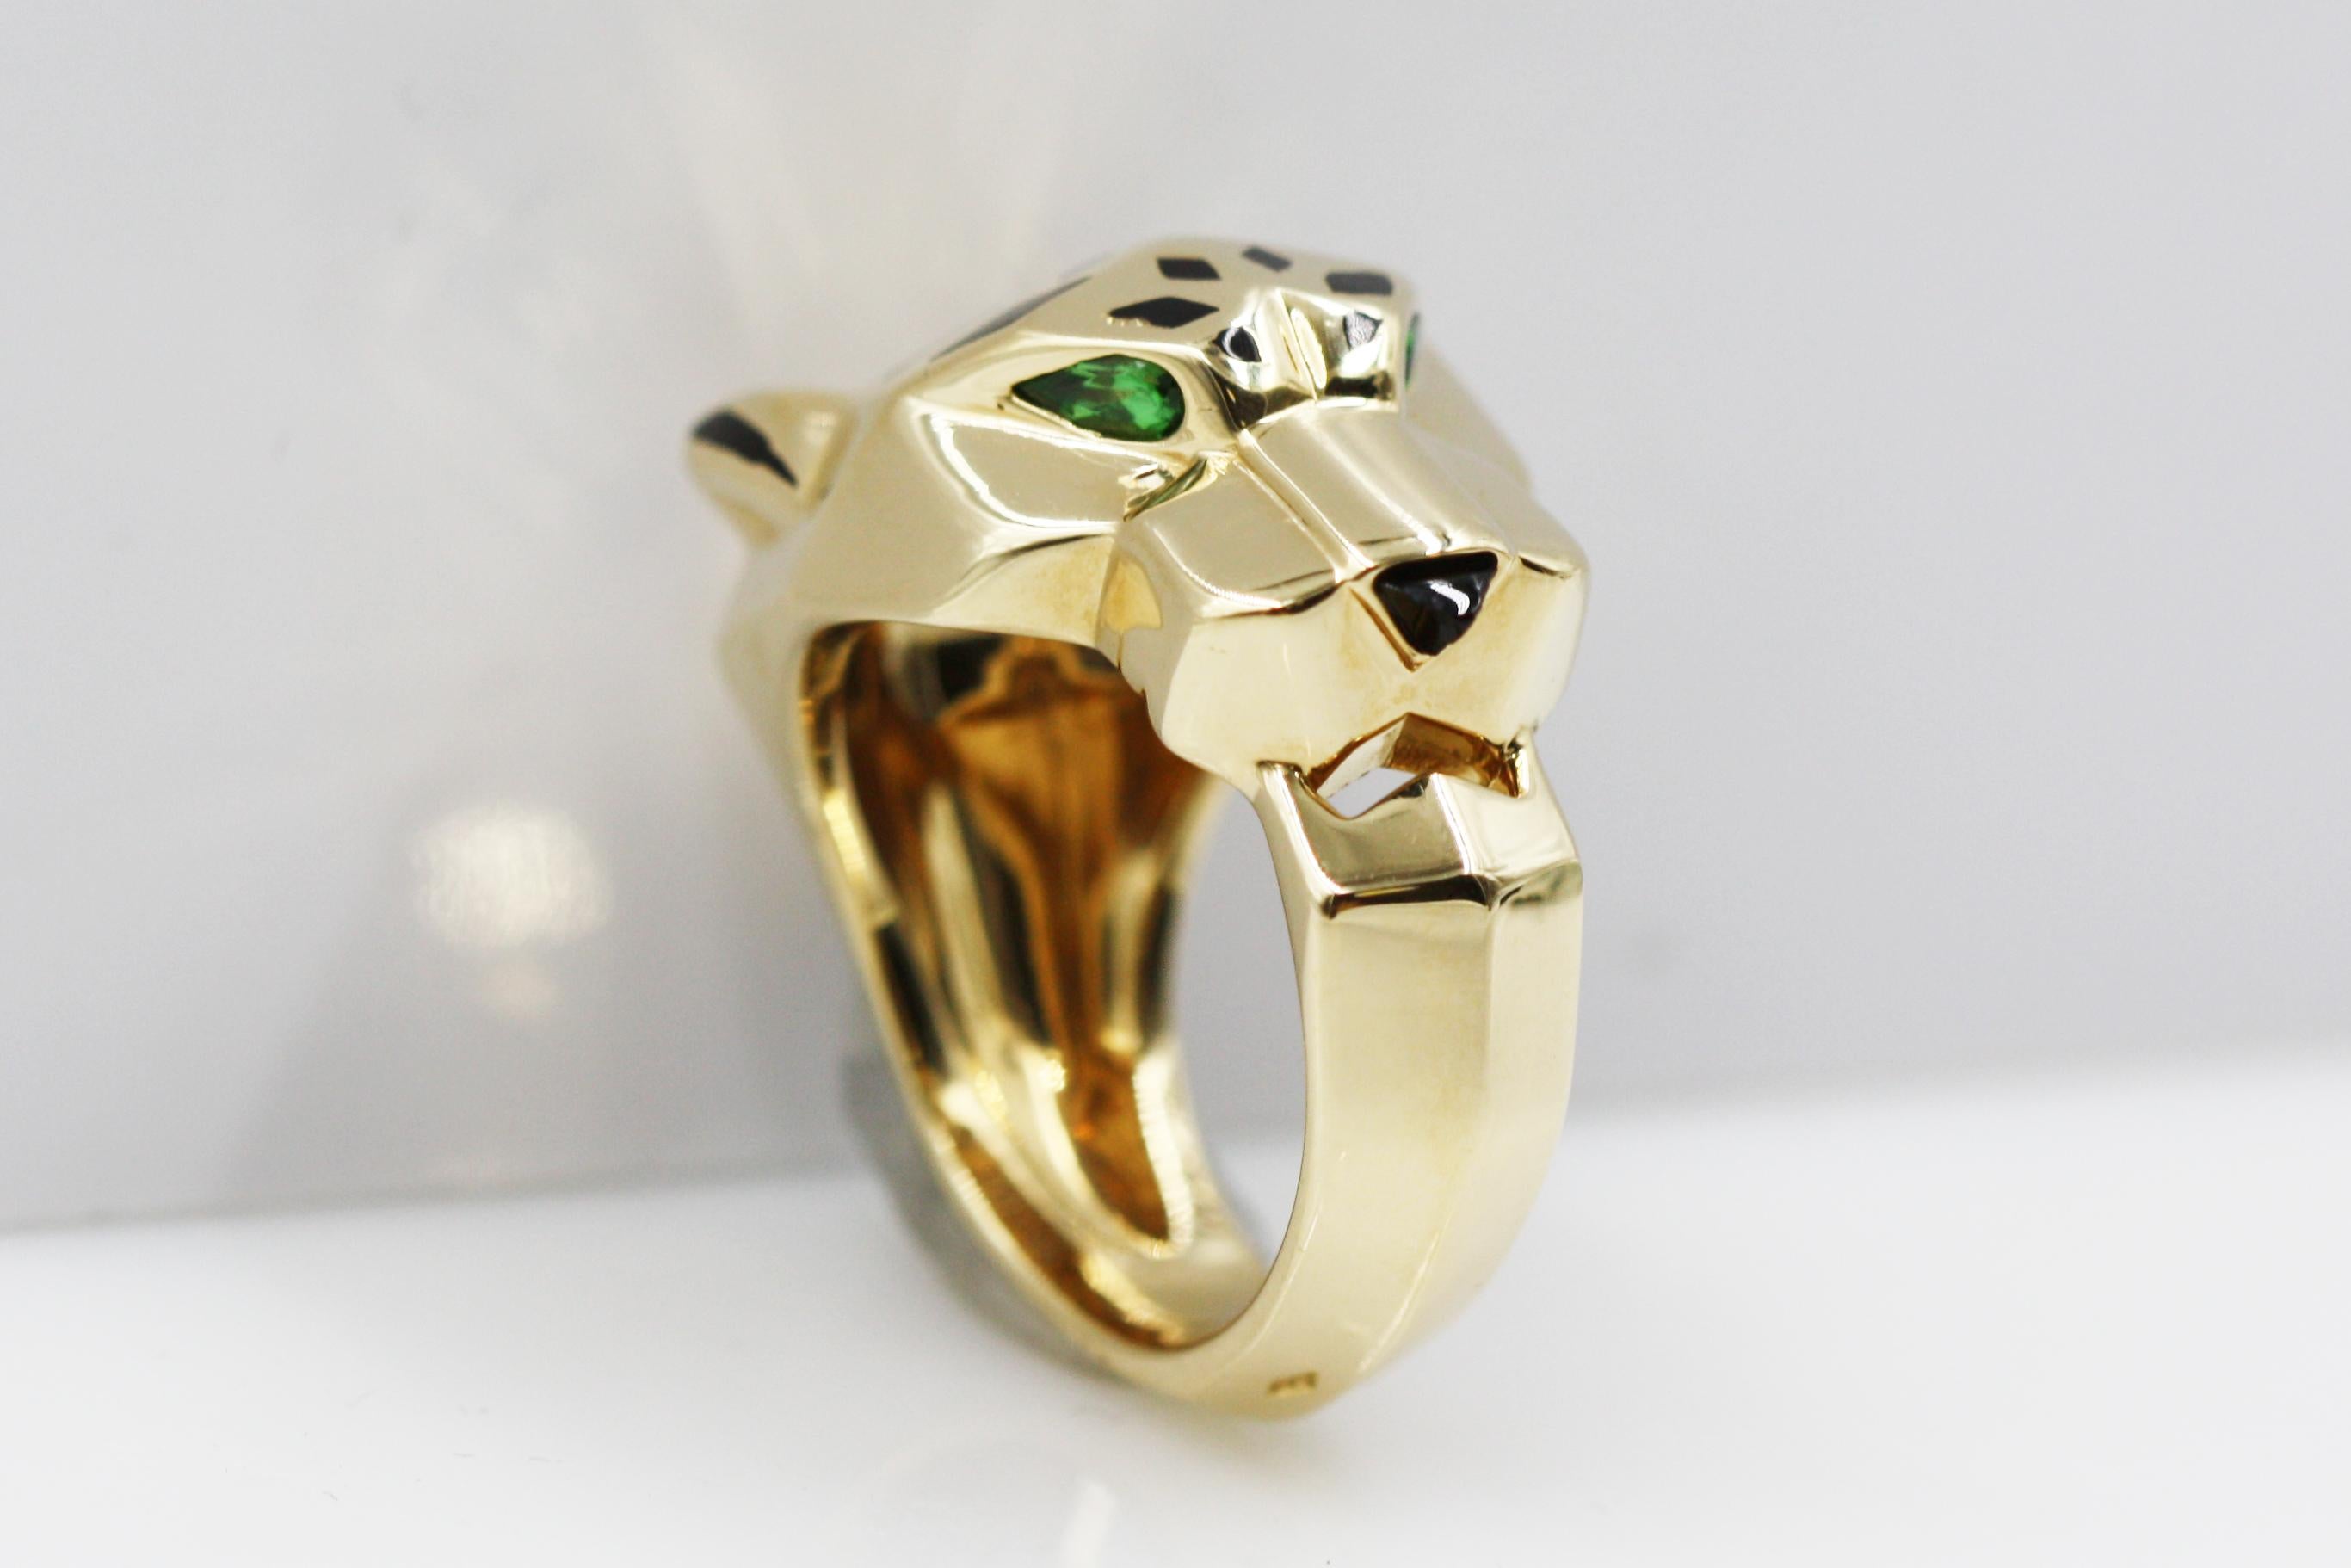 This incredible panther ring is the favorite of the Cartier brand, this prestigious brand chose the panther to be its representative animal. This ring is made in 18K yellow gold and embelished with black lacquer. Tsavorite garnets, onyx. REF: